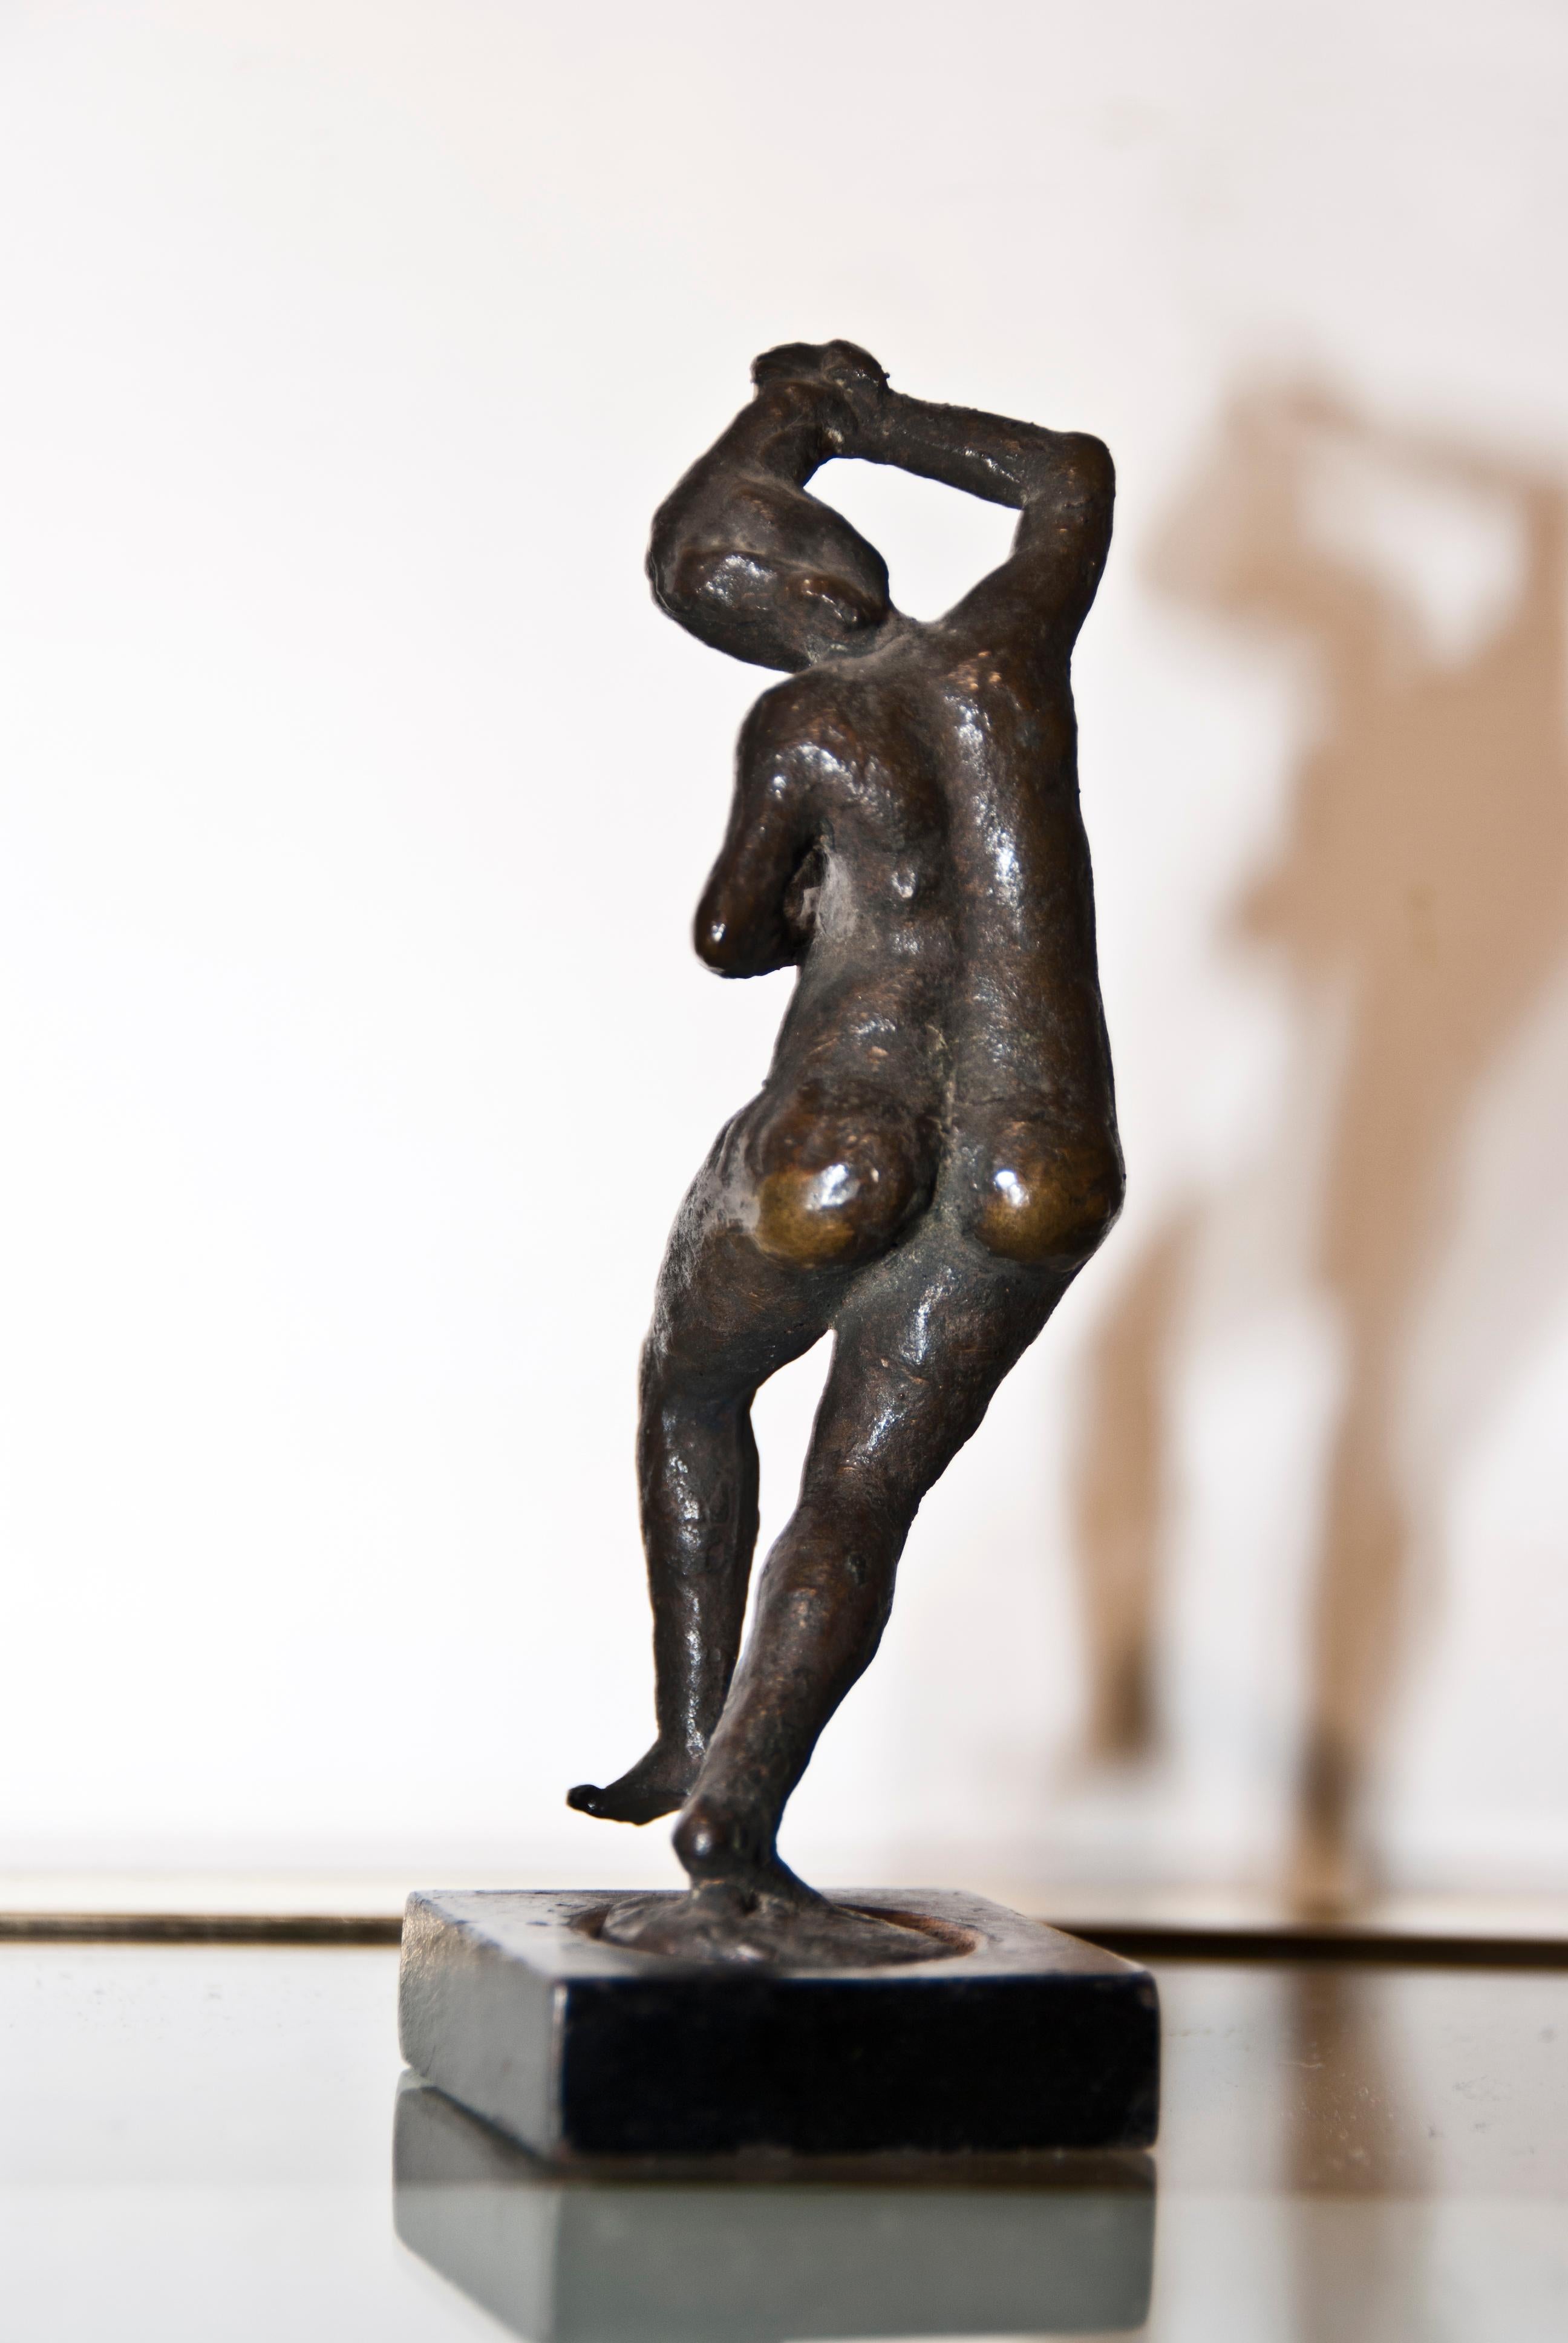 Bronze sculpture with wooden base. Signed and dated under the base.
Certificate of authenticity signed by the artist,
